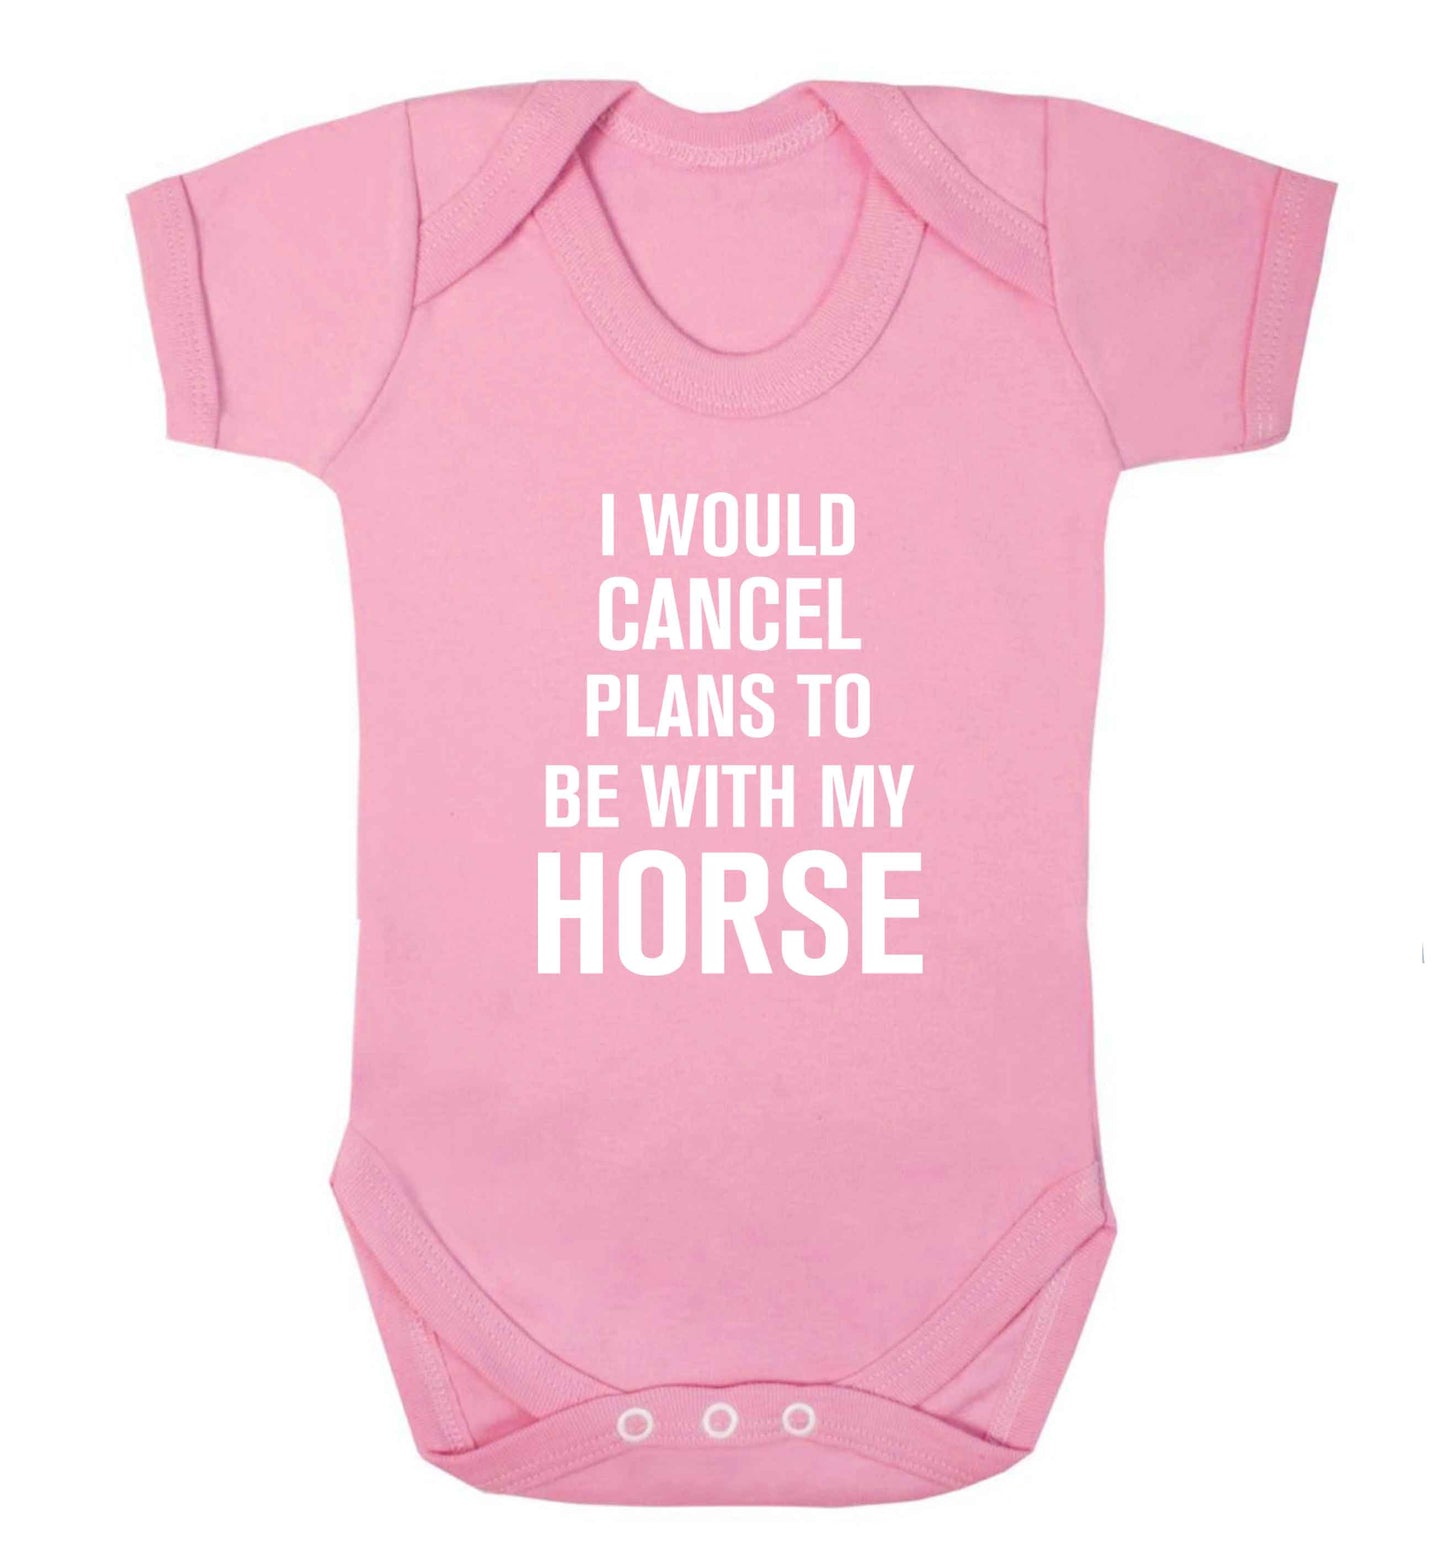 I will cancel plans to be with my horse baby vest pale pink 18-24 months